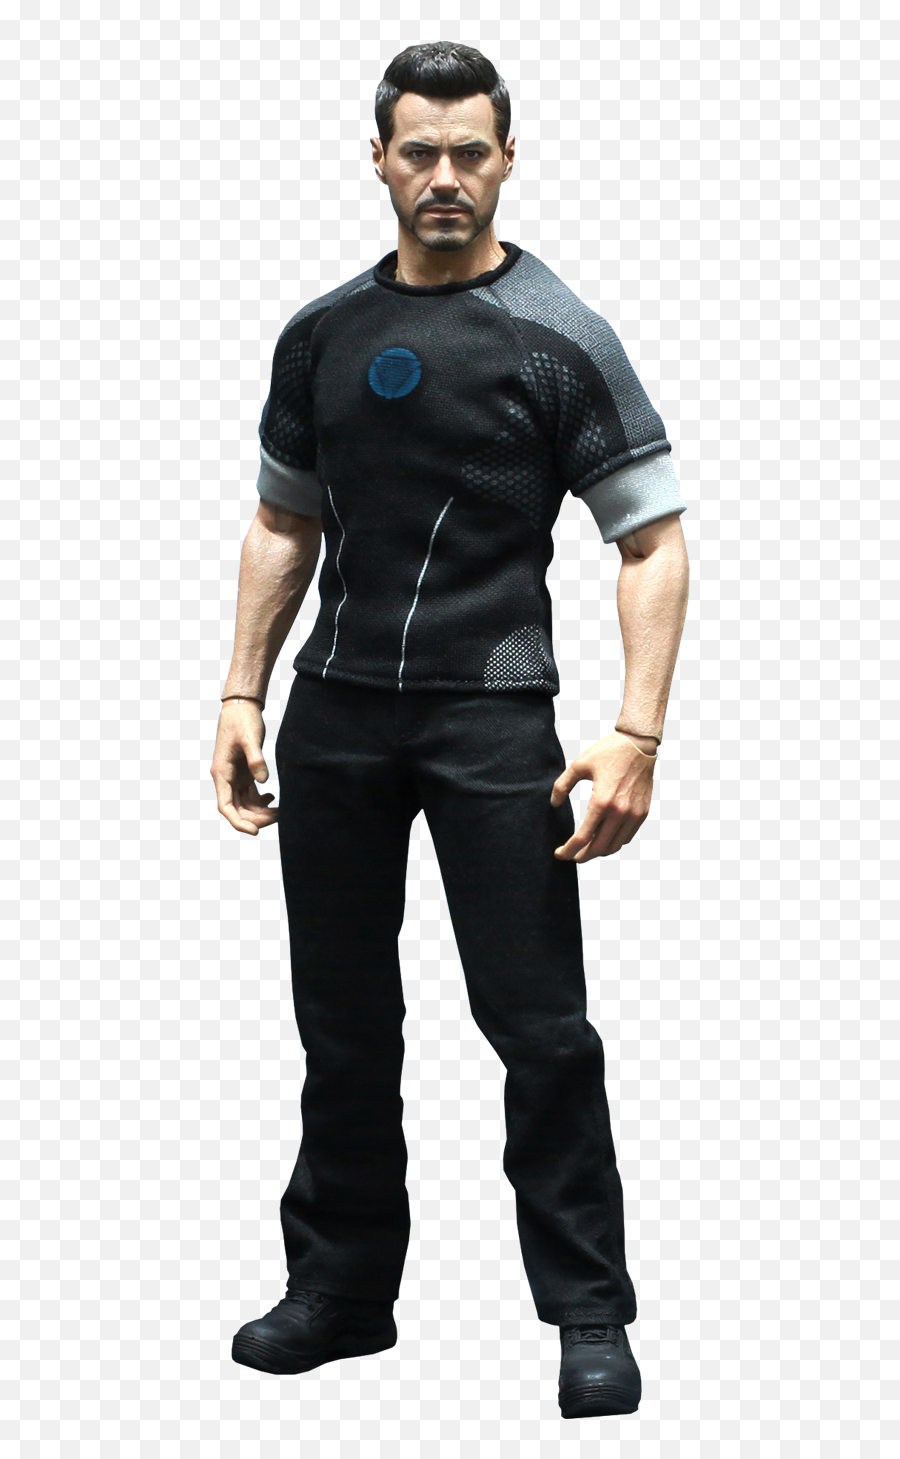 Download Free Png Tony Stark - Final Fantasy Type 0 Ace Summer Outfit,Stark Png